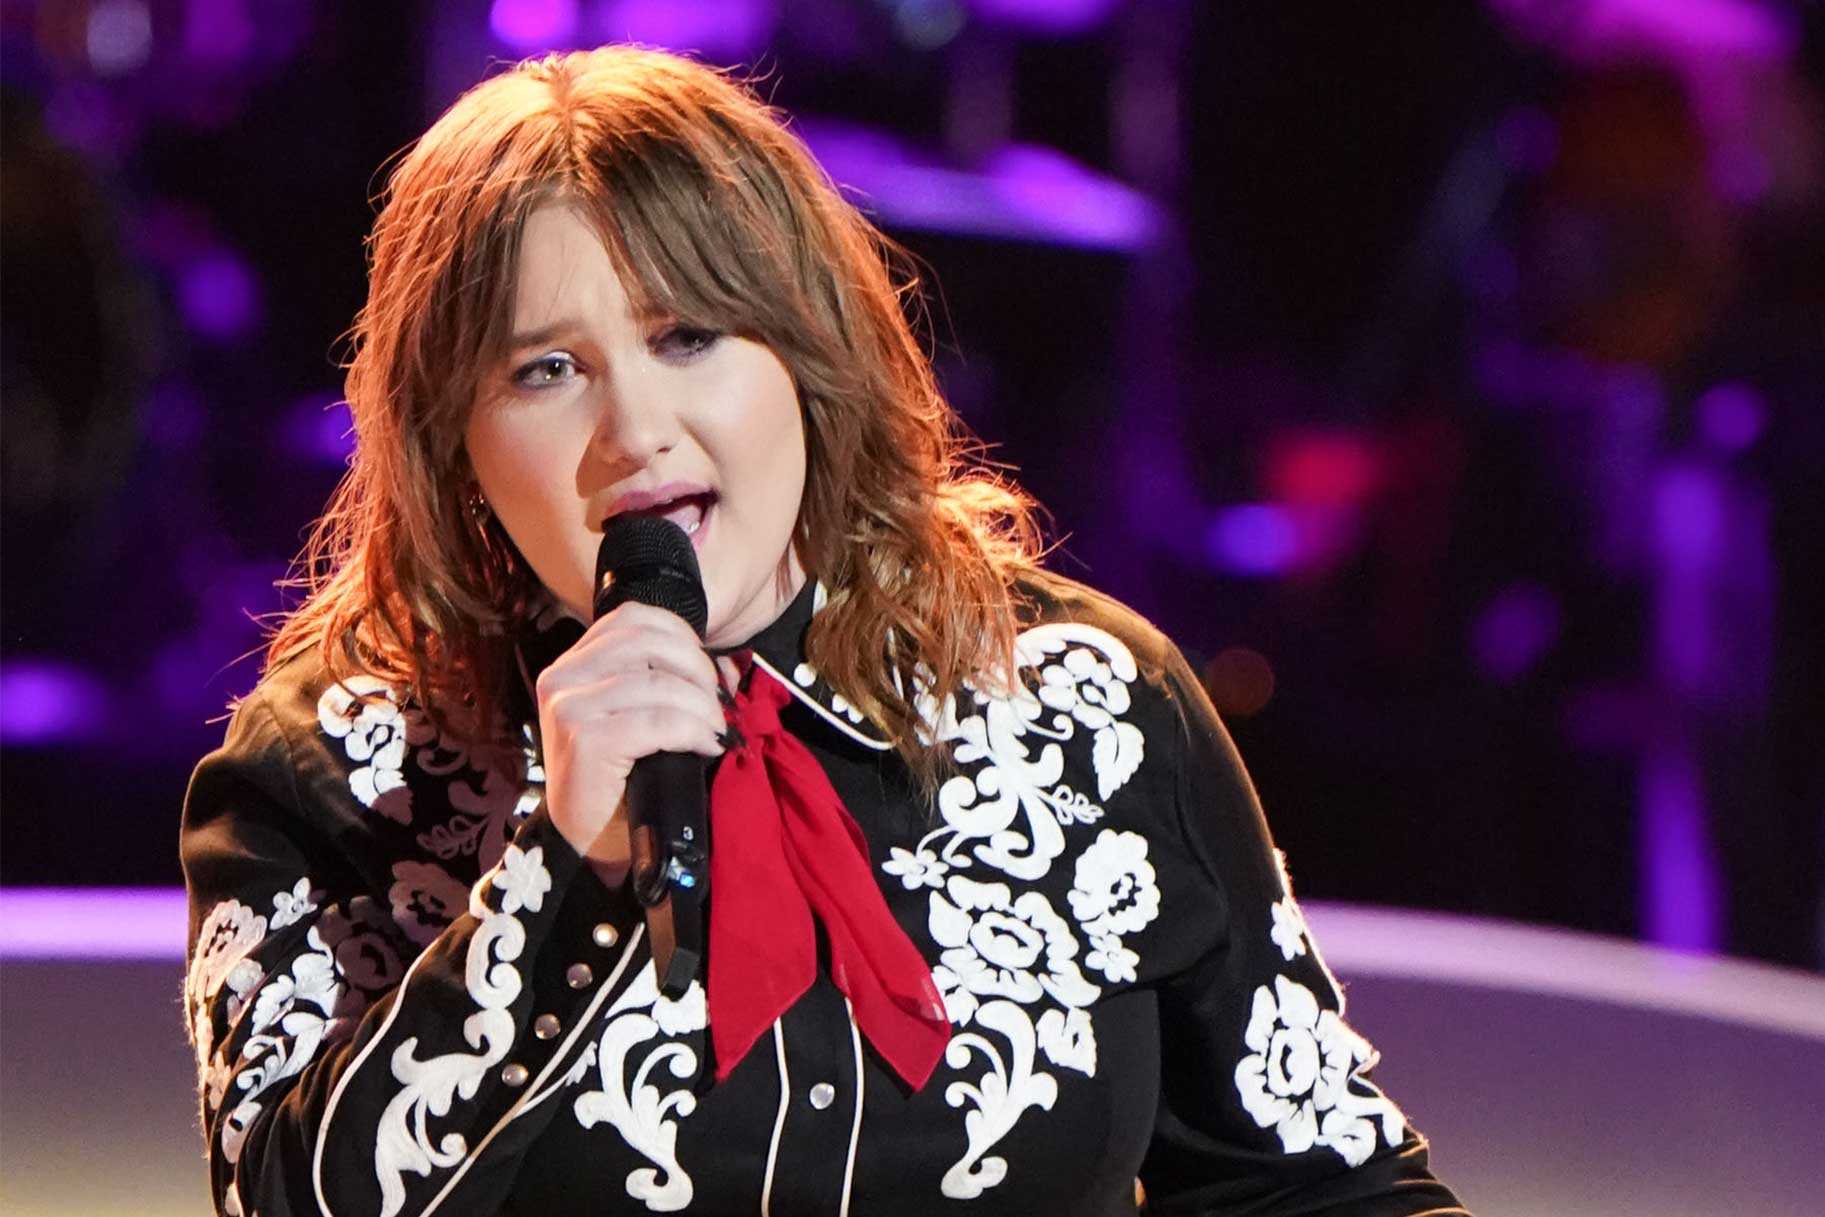 Ruby Leigh's stunning 'Long Long Time' performance on The Voice leaves judges awestruck